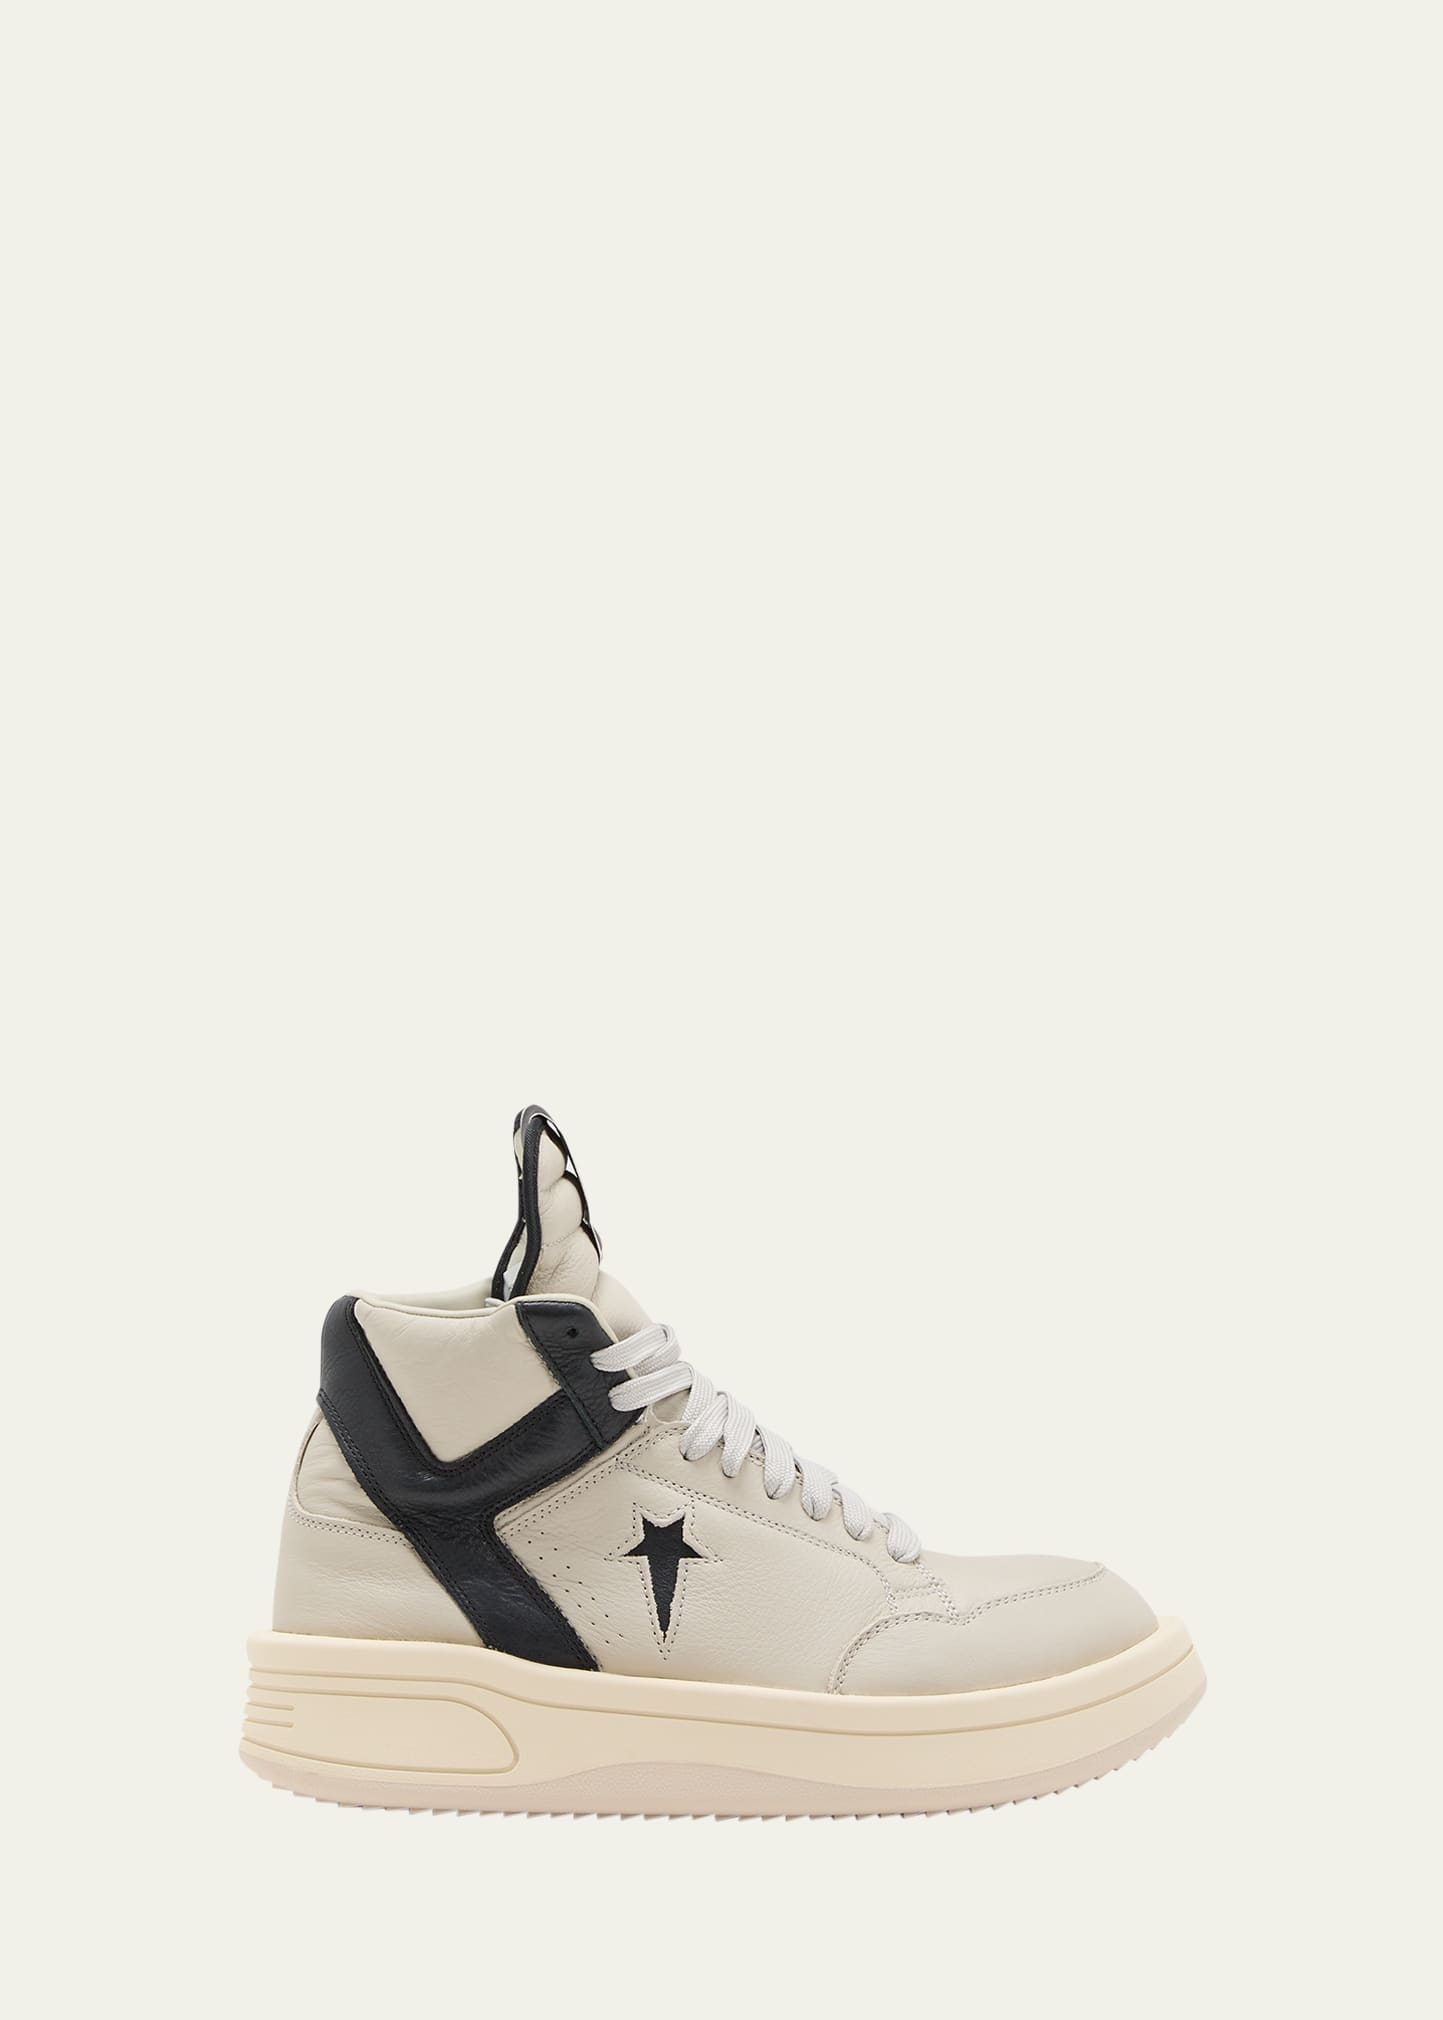 x Converse Men's Turbowpn Leather High-Top Sneakers